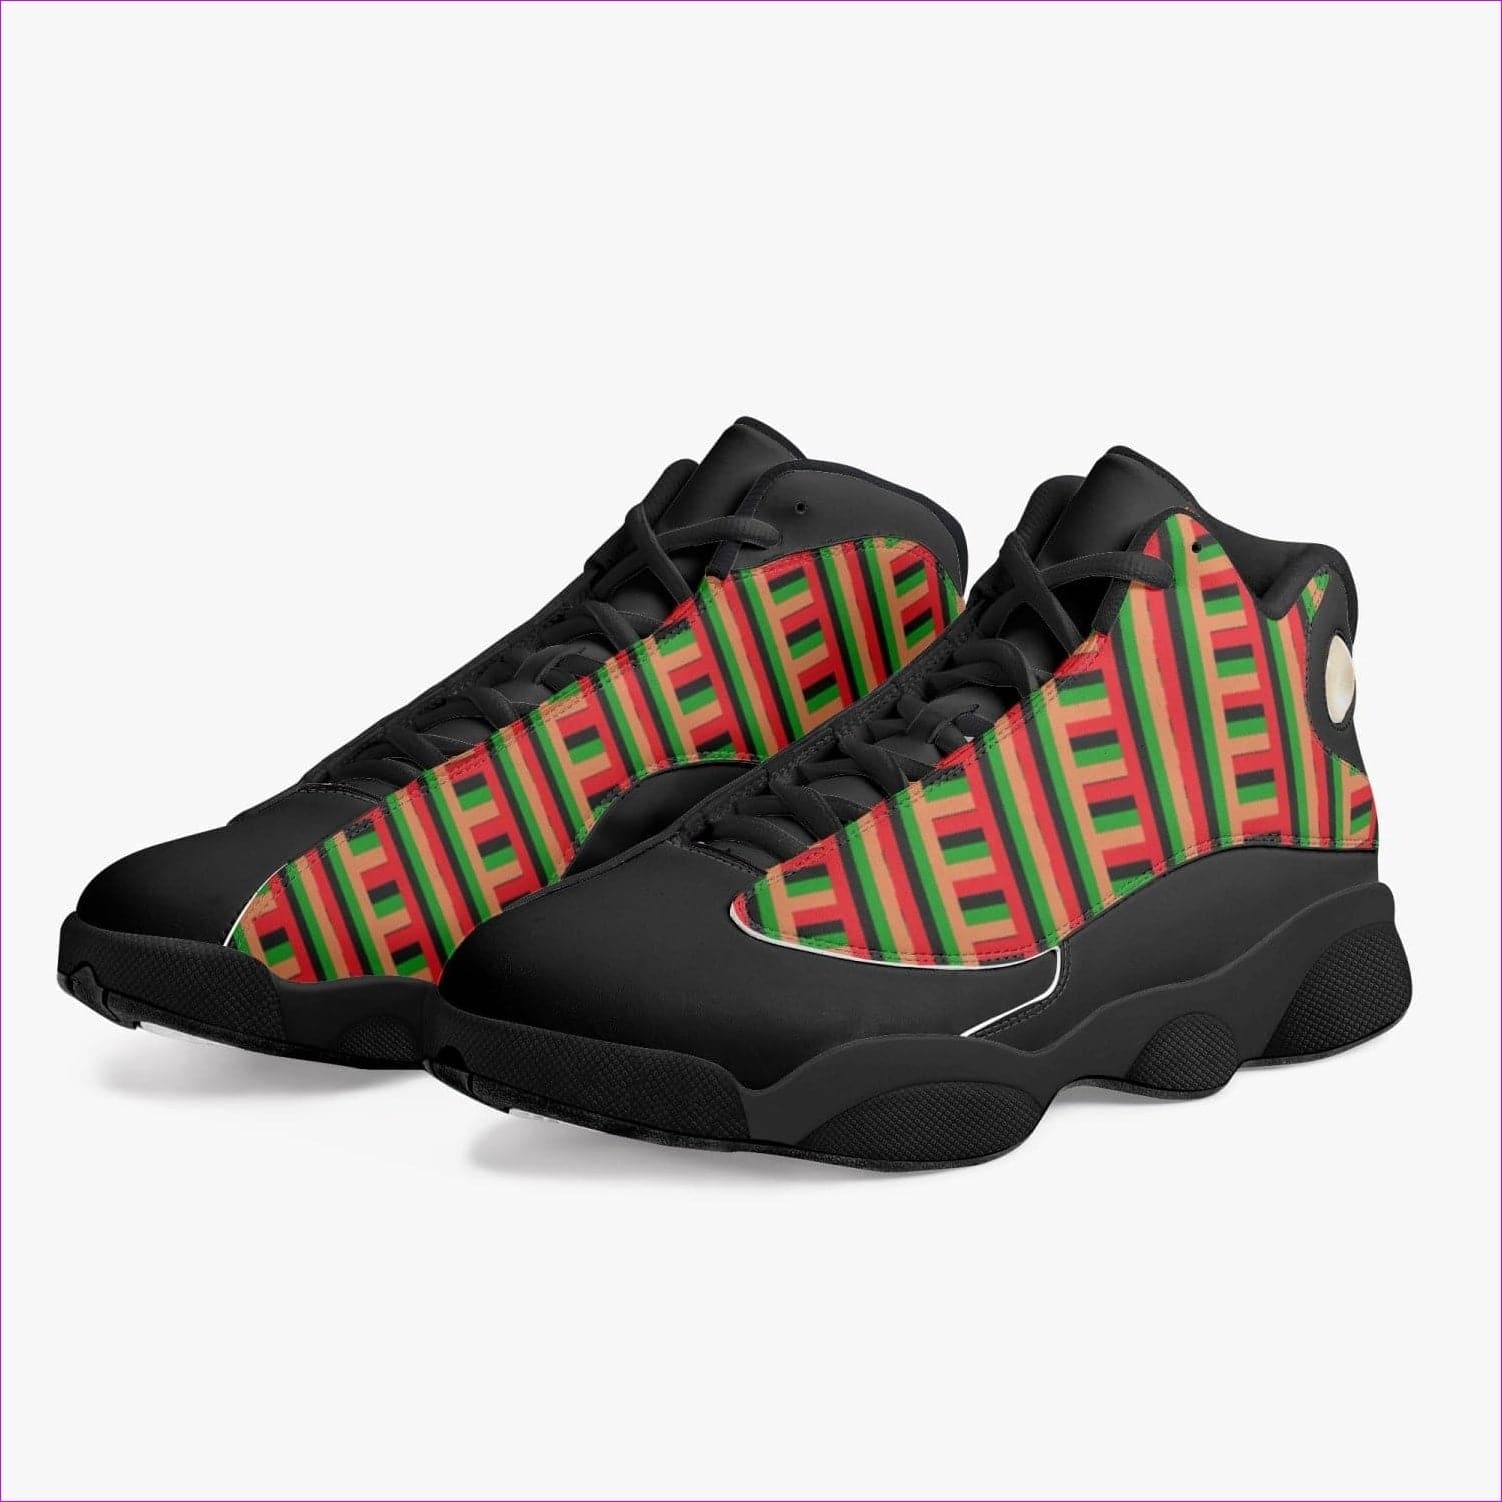 Striped Galore Black Leather Basketball Sneakers - unisex basketball shoes at TFC&H Co.